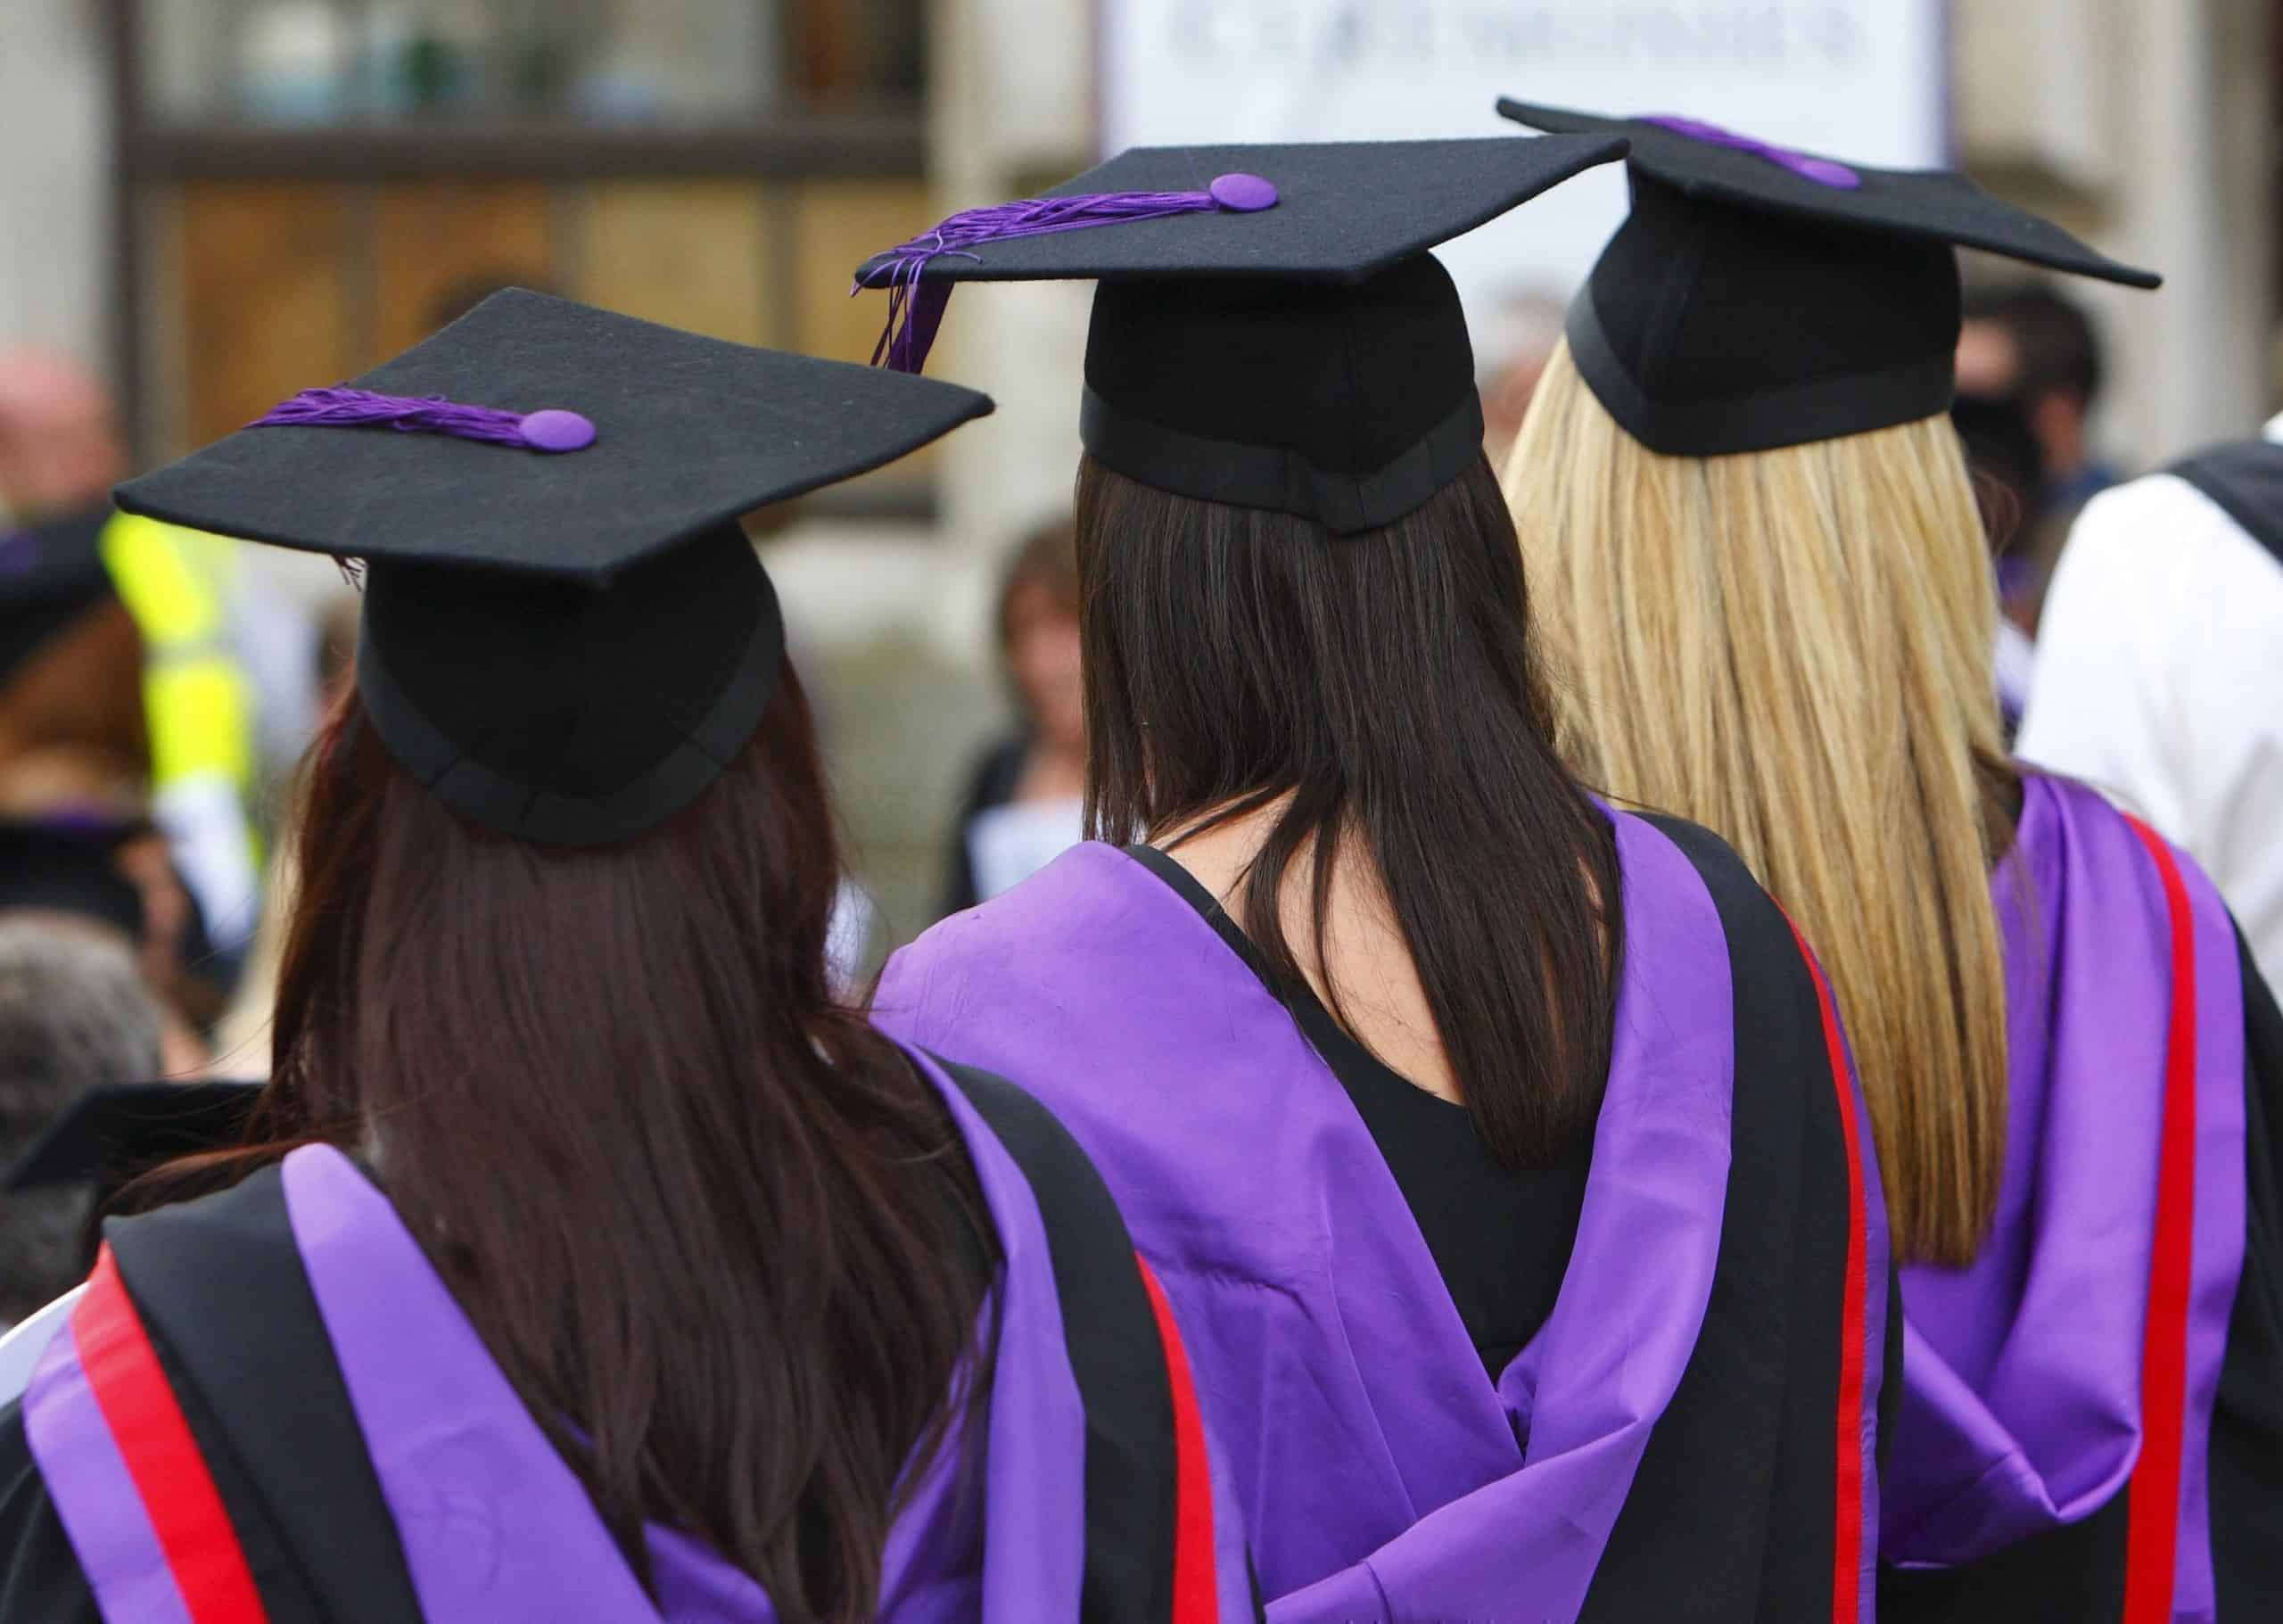 UK Universities failing to tackle ‘endemic’ levels of sexual violence